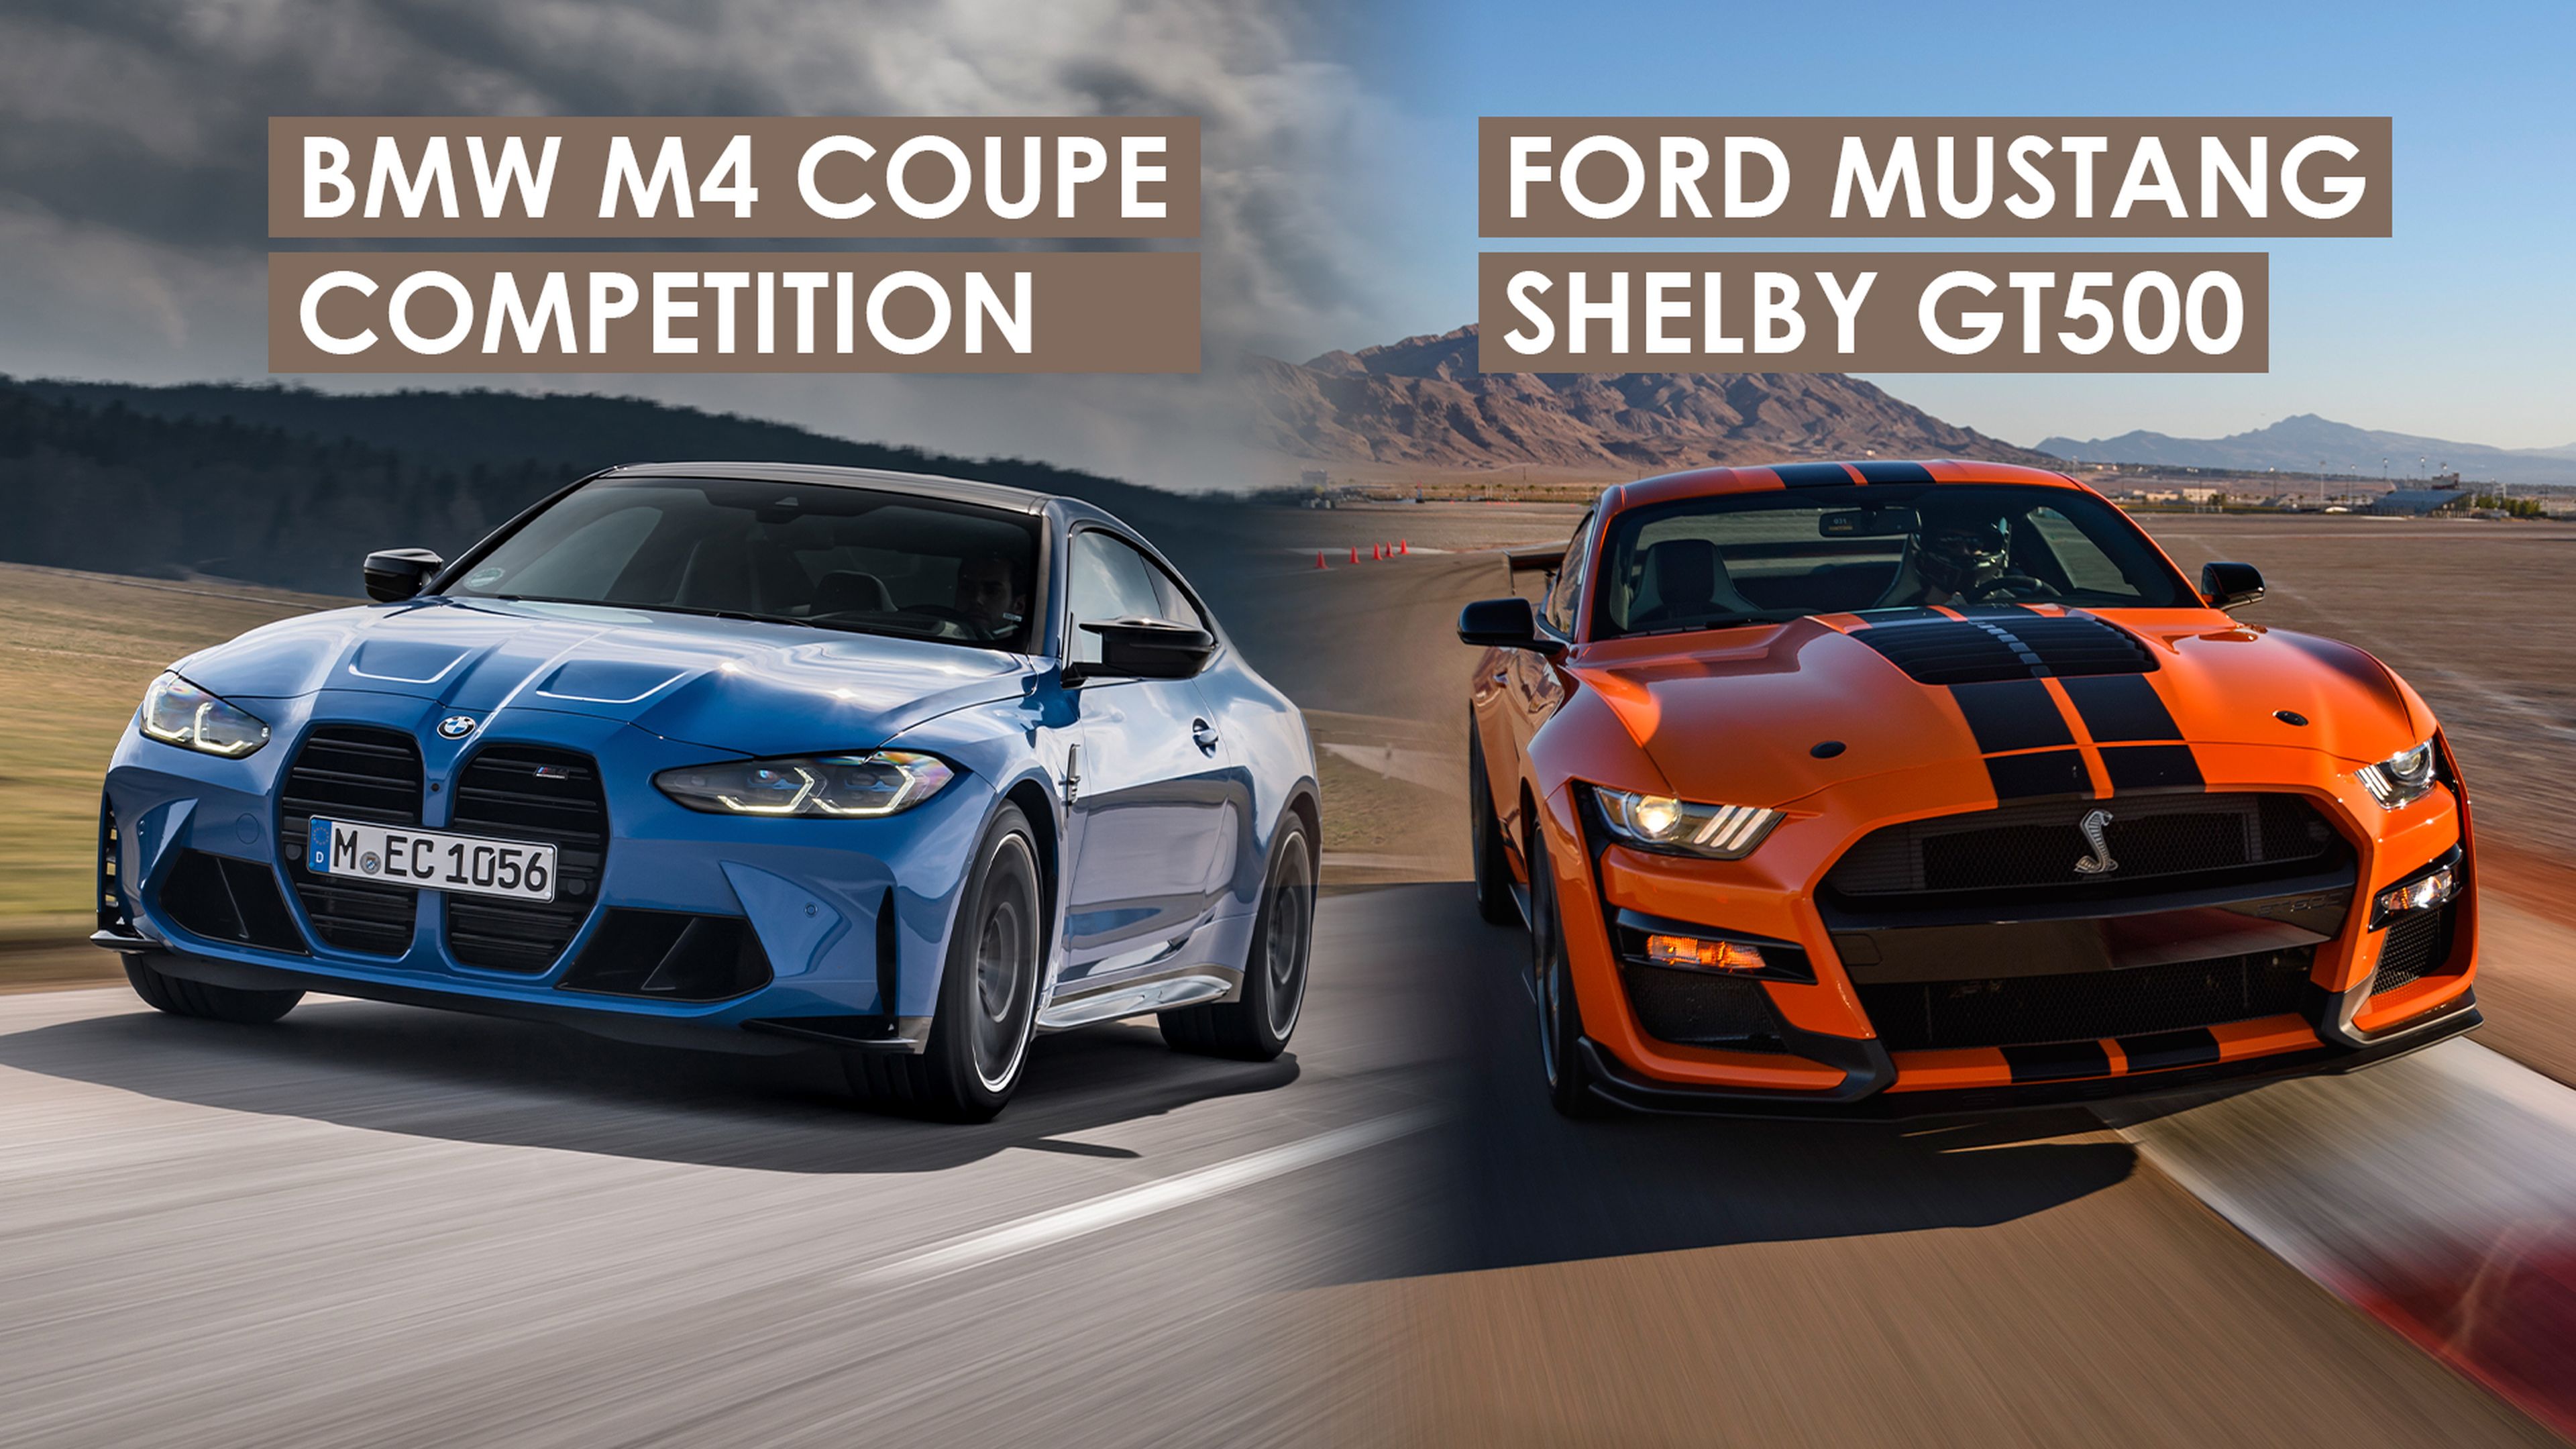 BMW M4 Coupé Competition G82 (izquierda) y Ford Mustang Shelby GT500 (derecha)